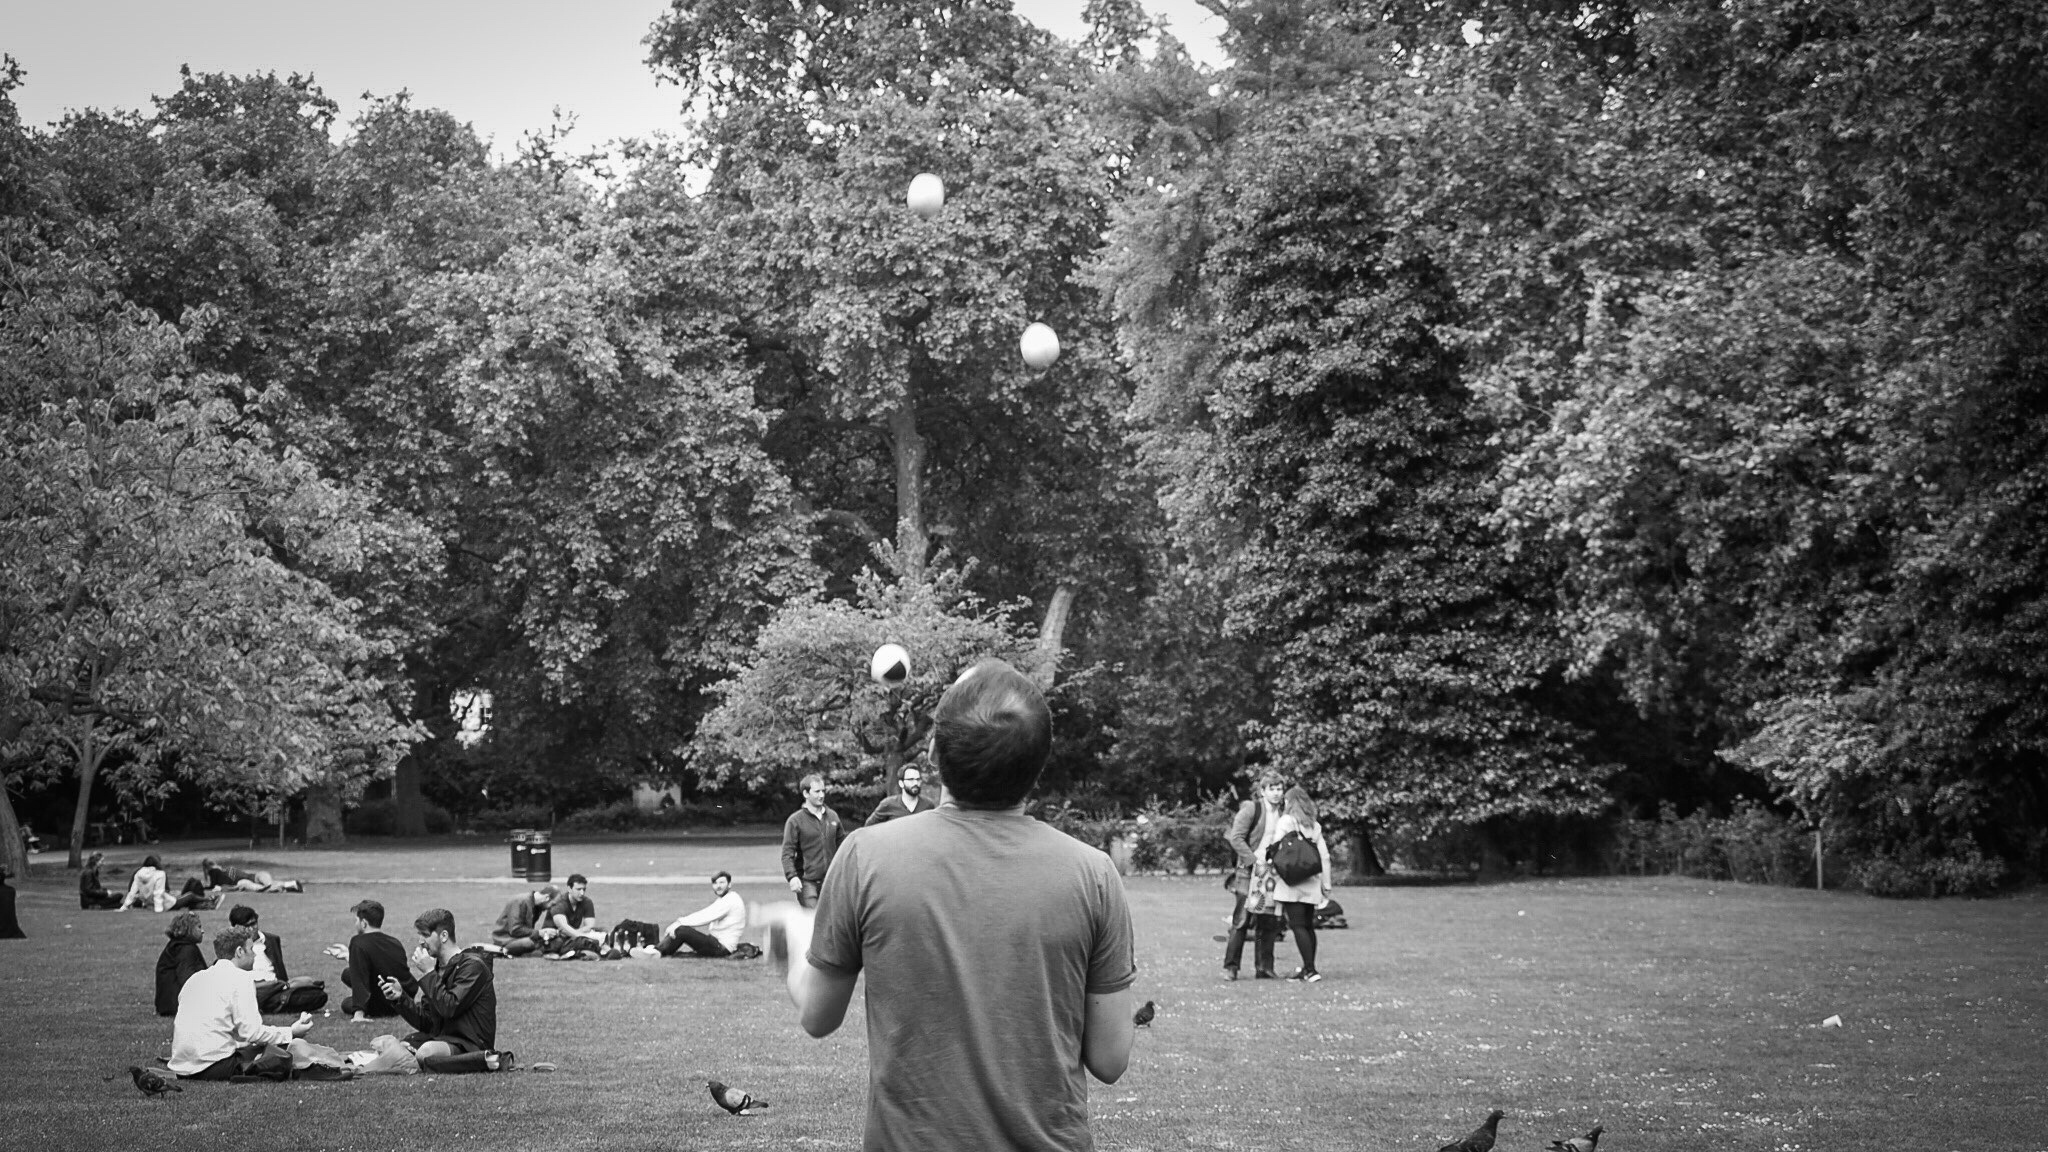 Juggling in the park